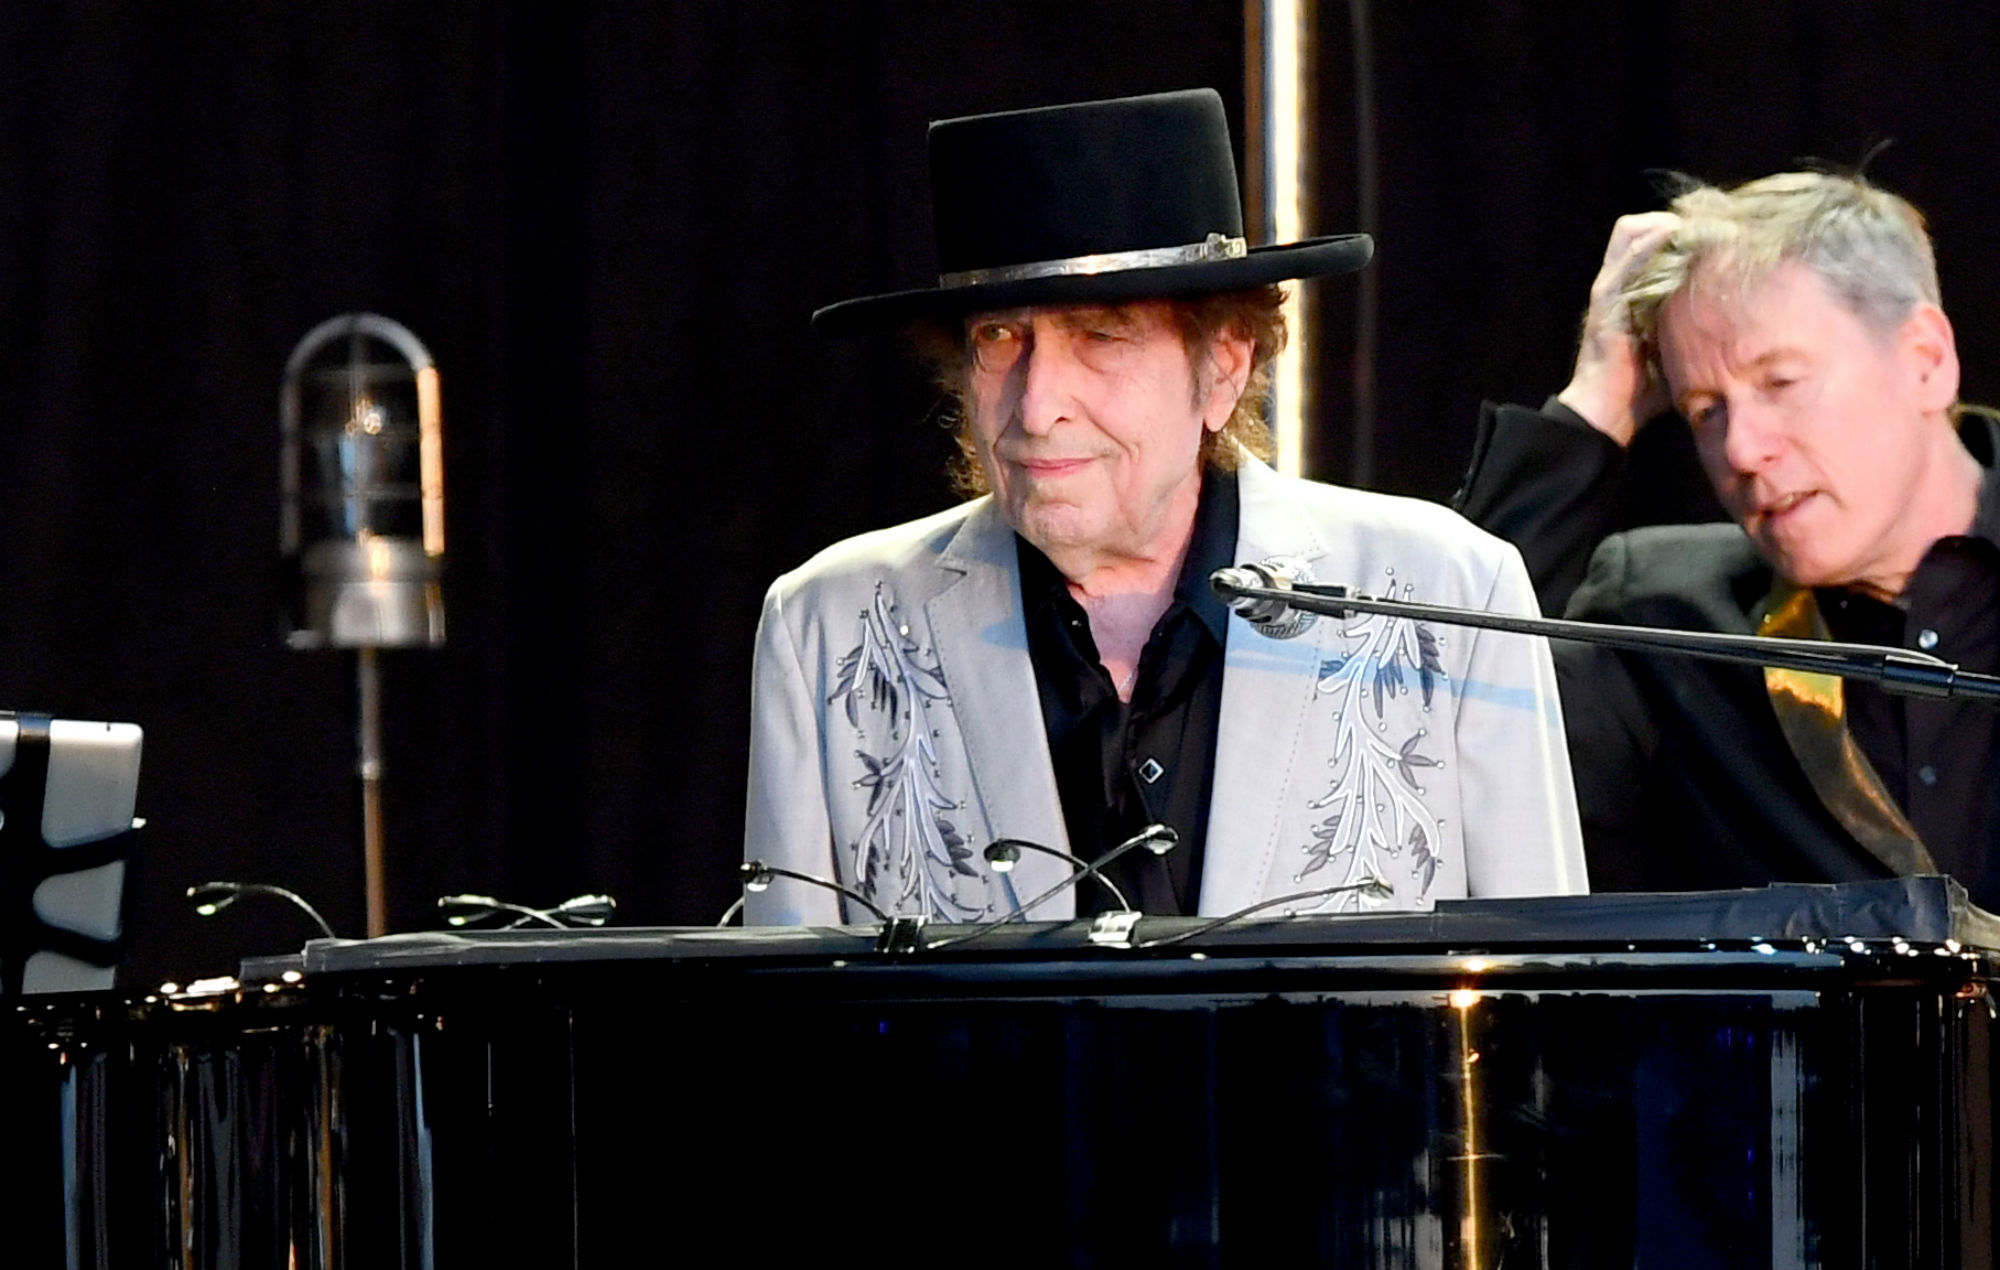 Bob Dylan Releases Another New Song: “I Contain Multitudes”